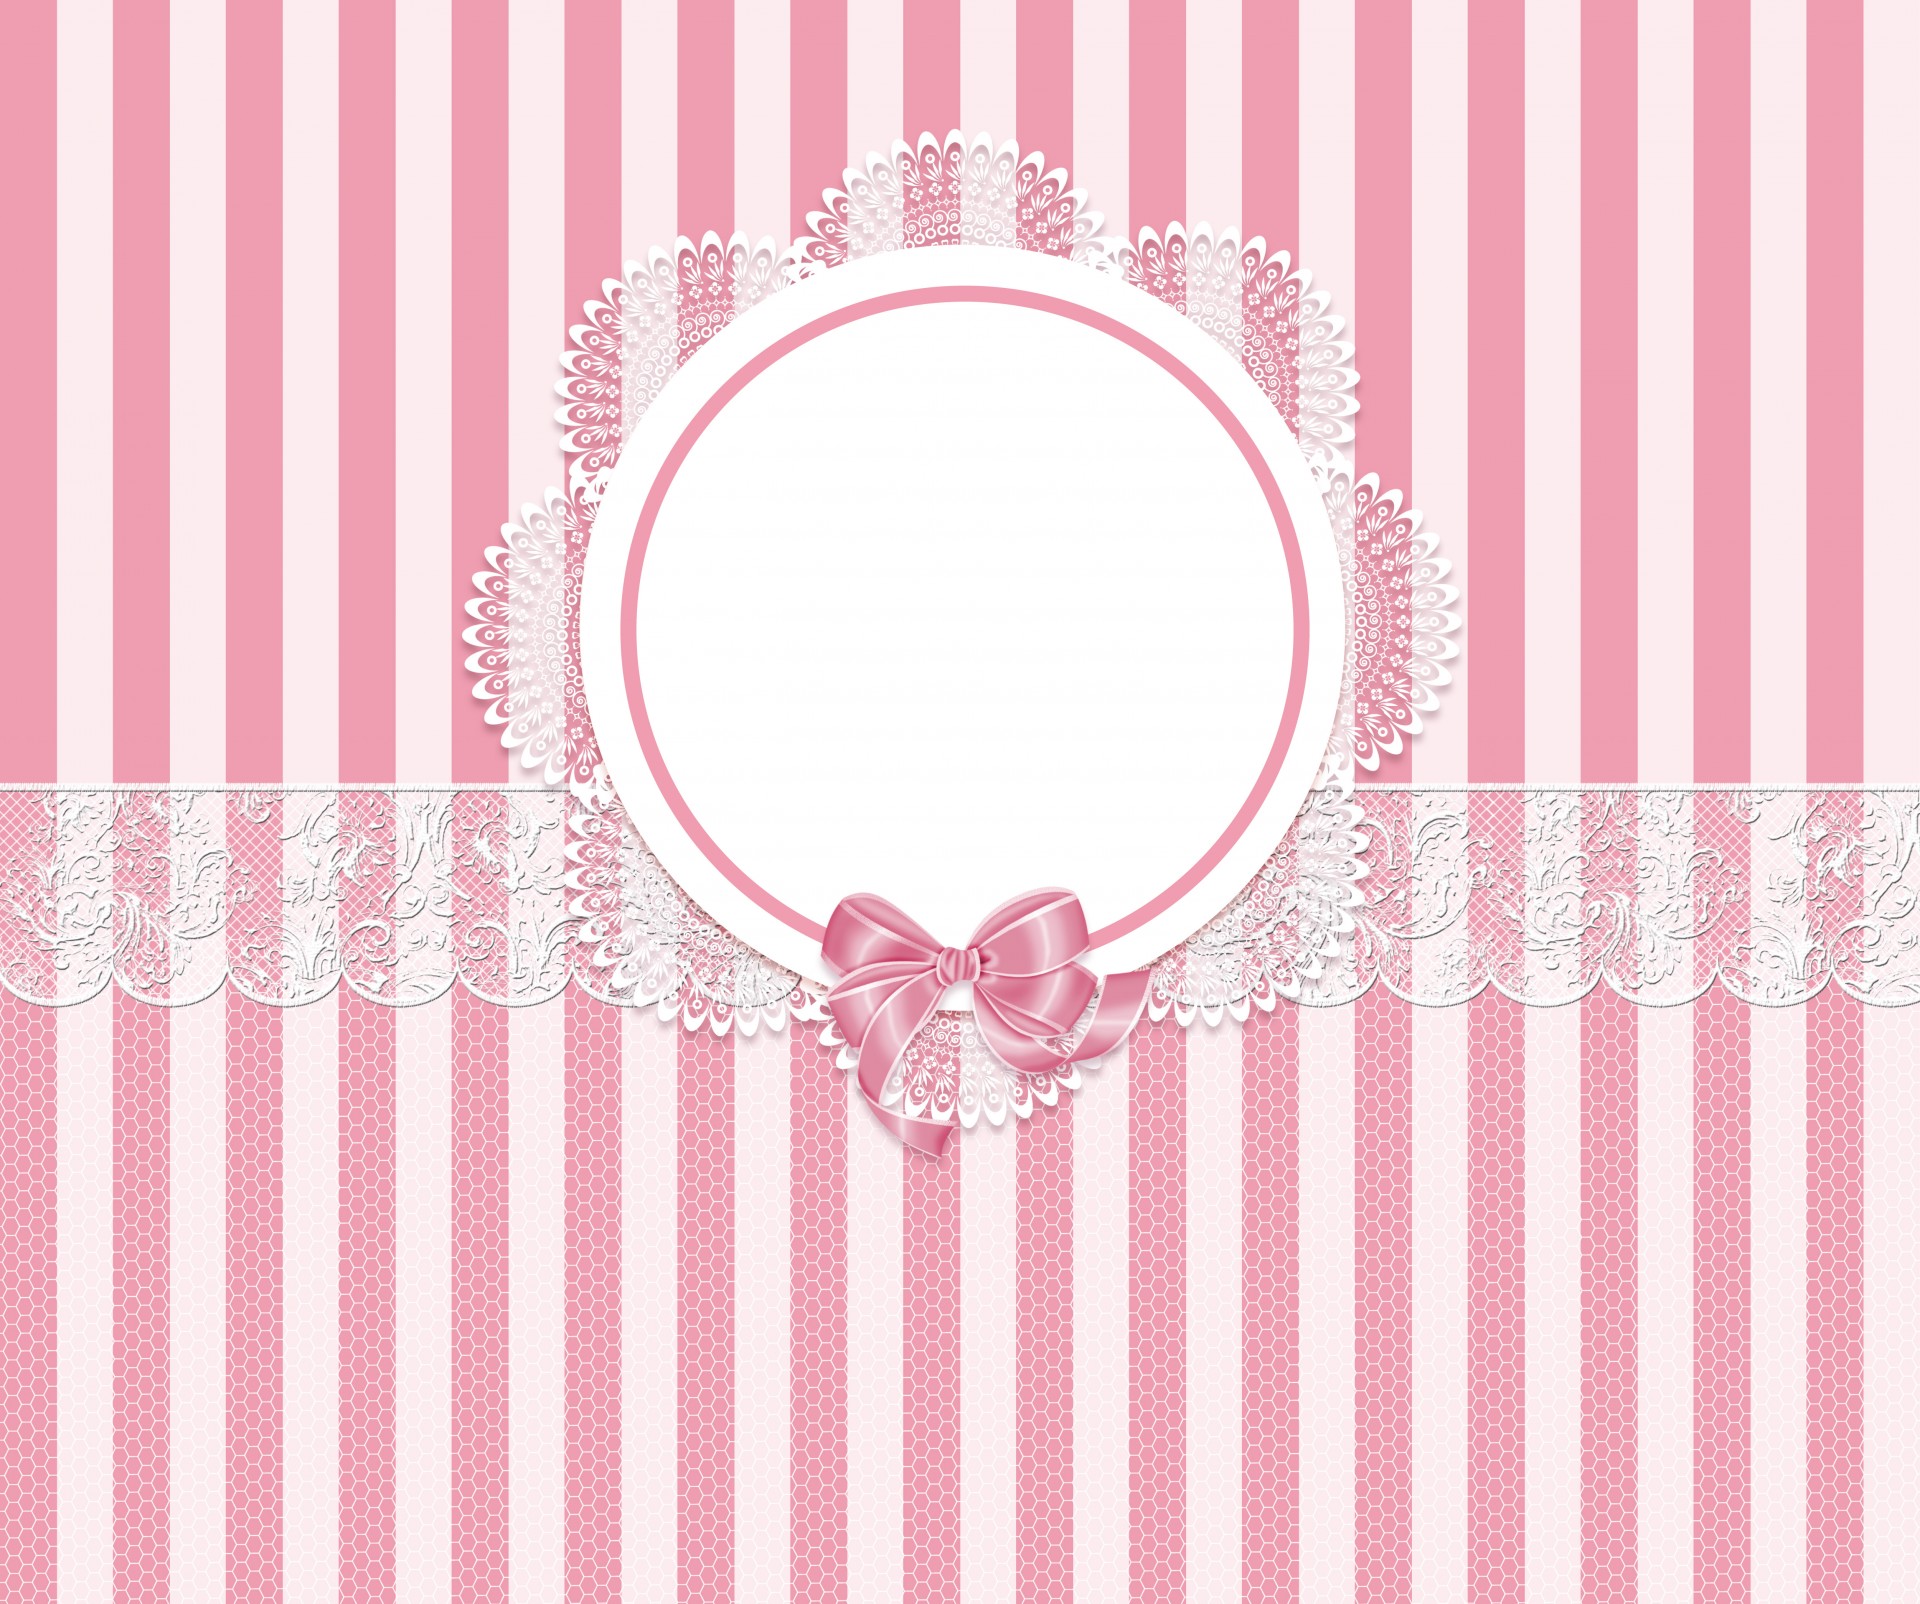 Stripes,striped,pink,lace,lacey - free image from